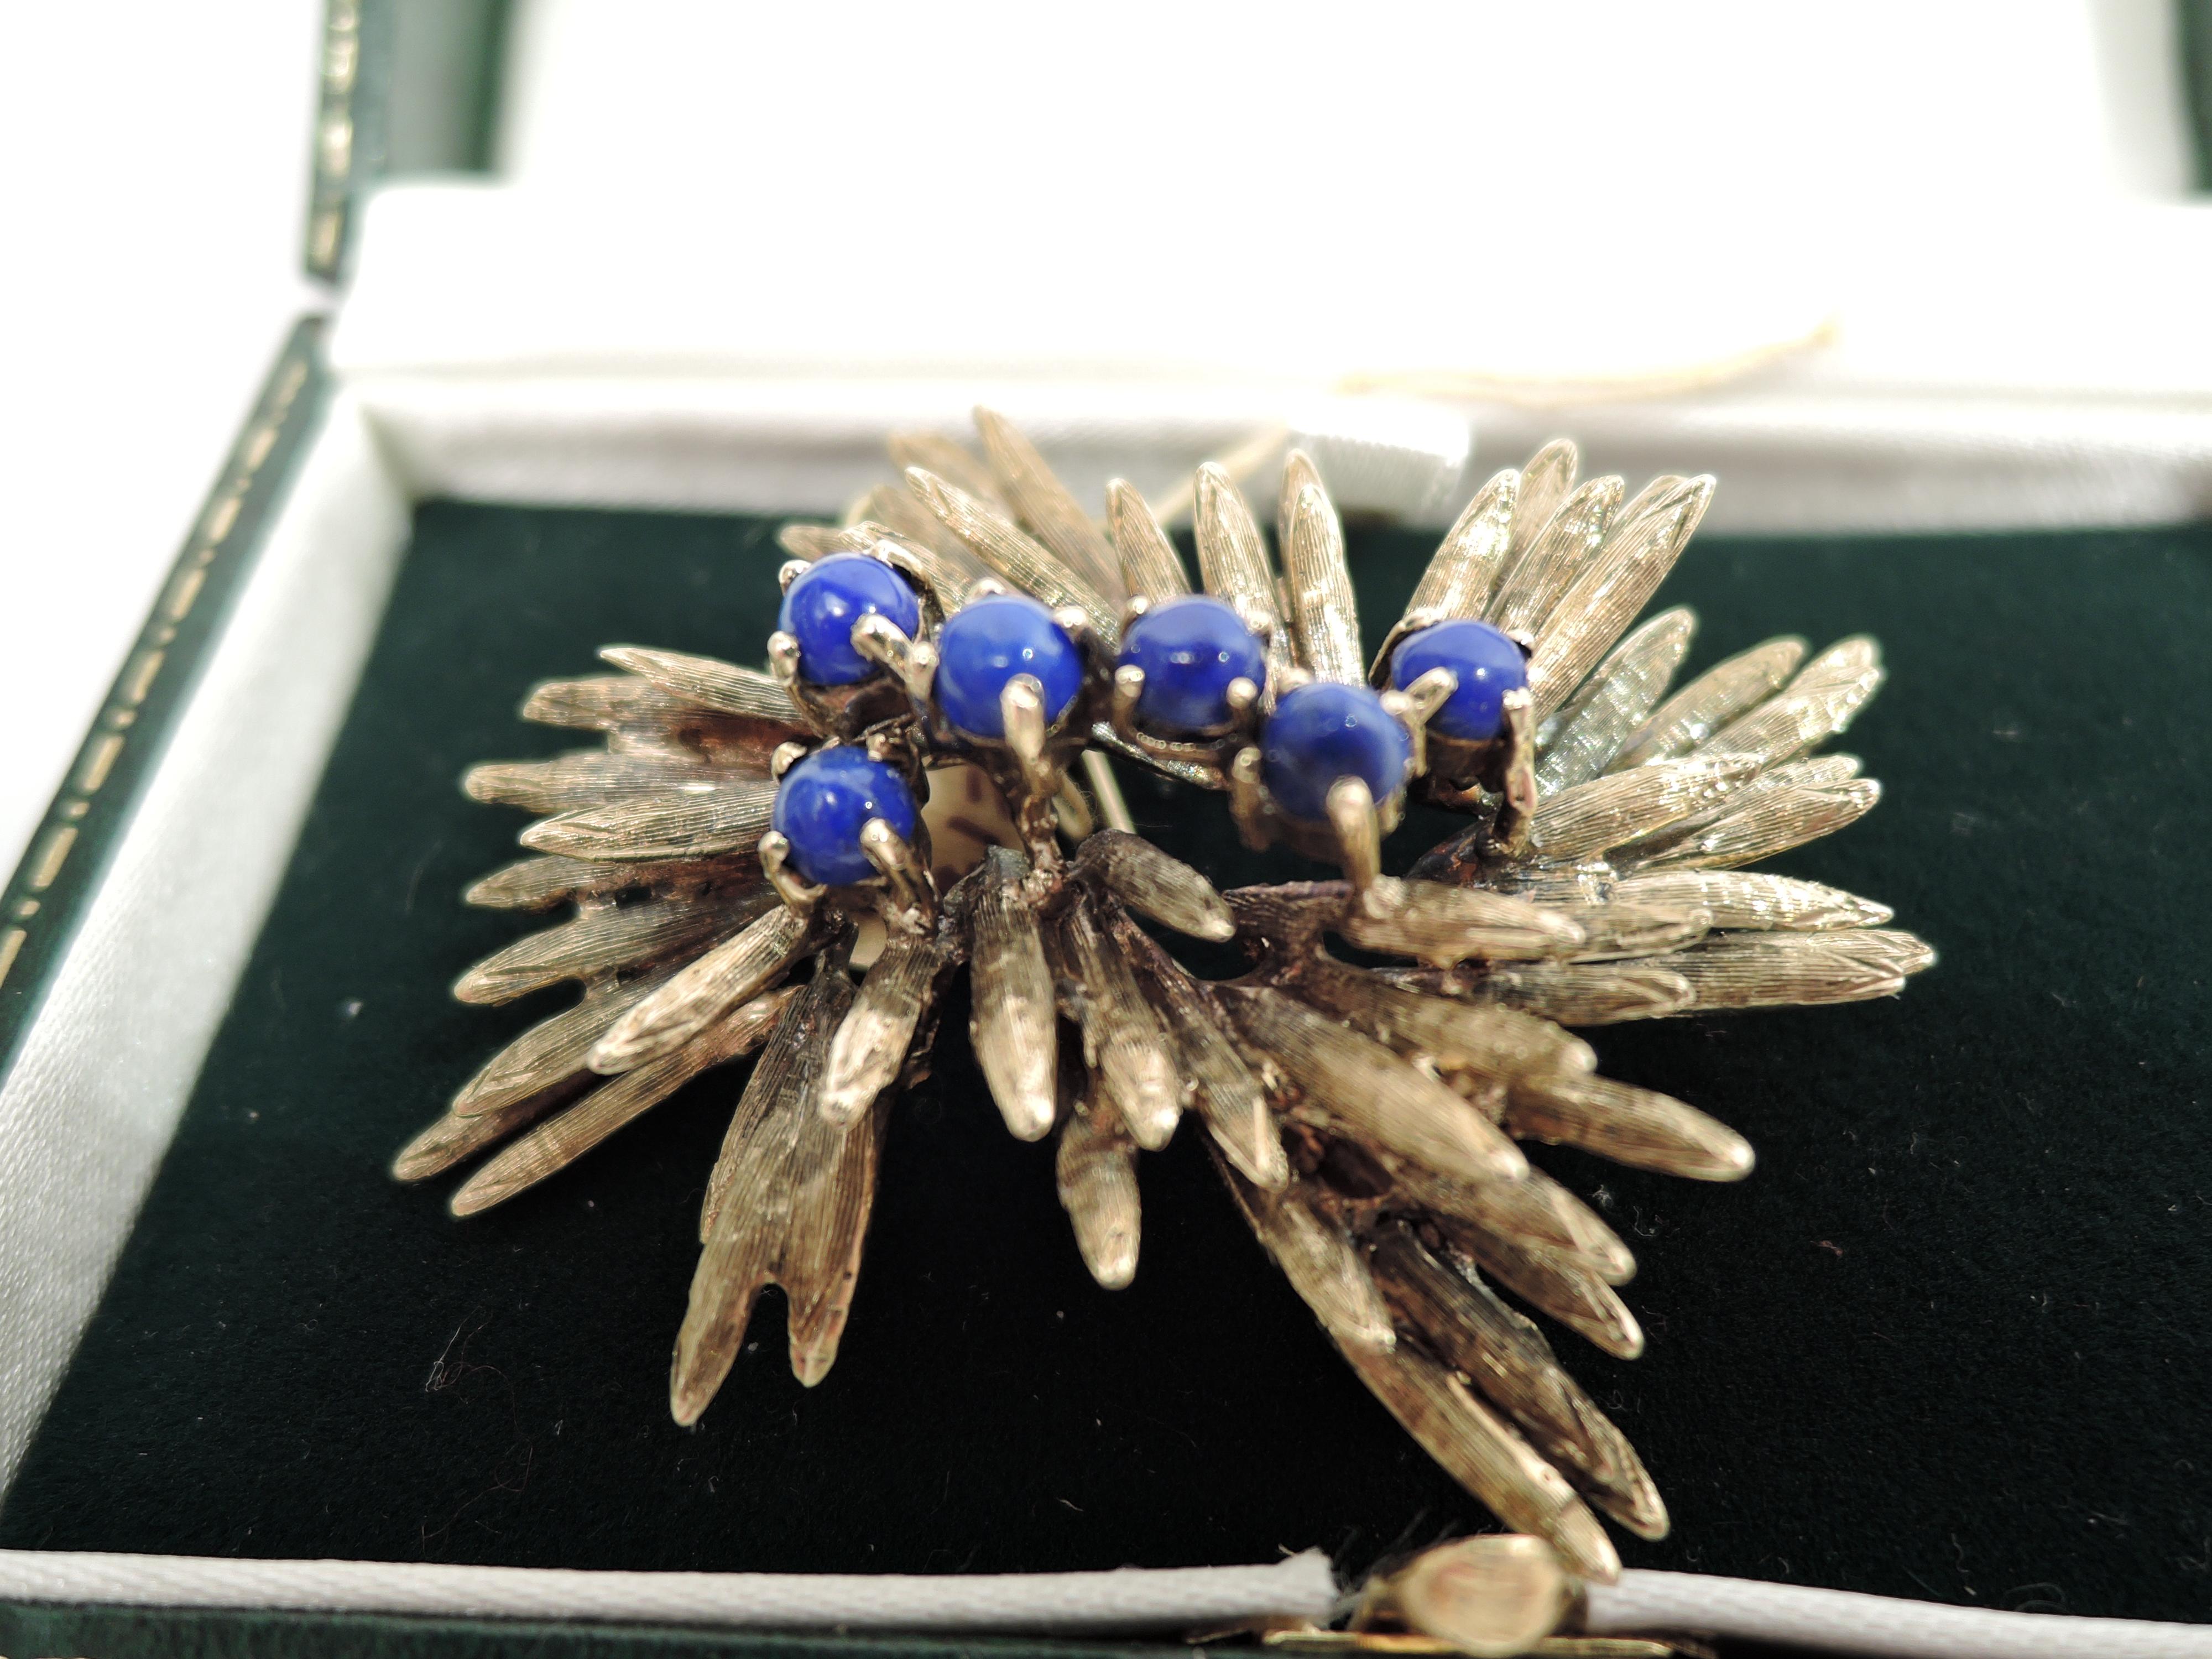 Midcentury Modern brooch. A cluster of lapis lazuli berries mounted to irregular and striated 14k gold leaves. United States, ca 1960s.